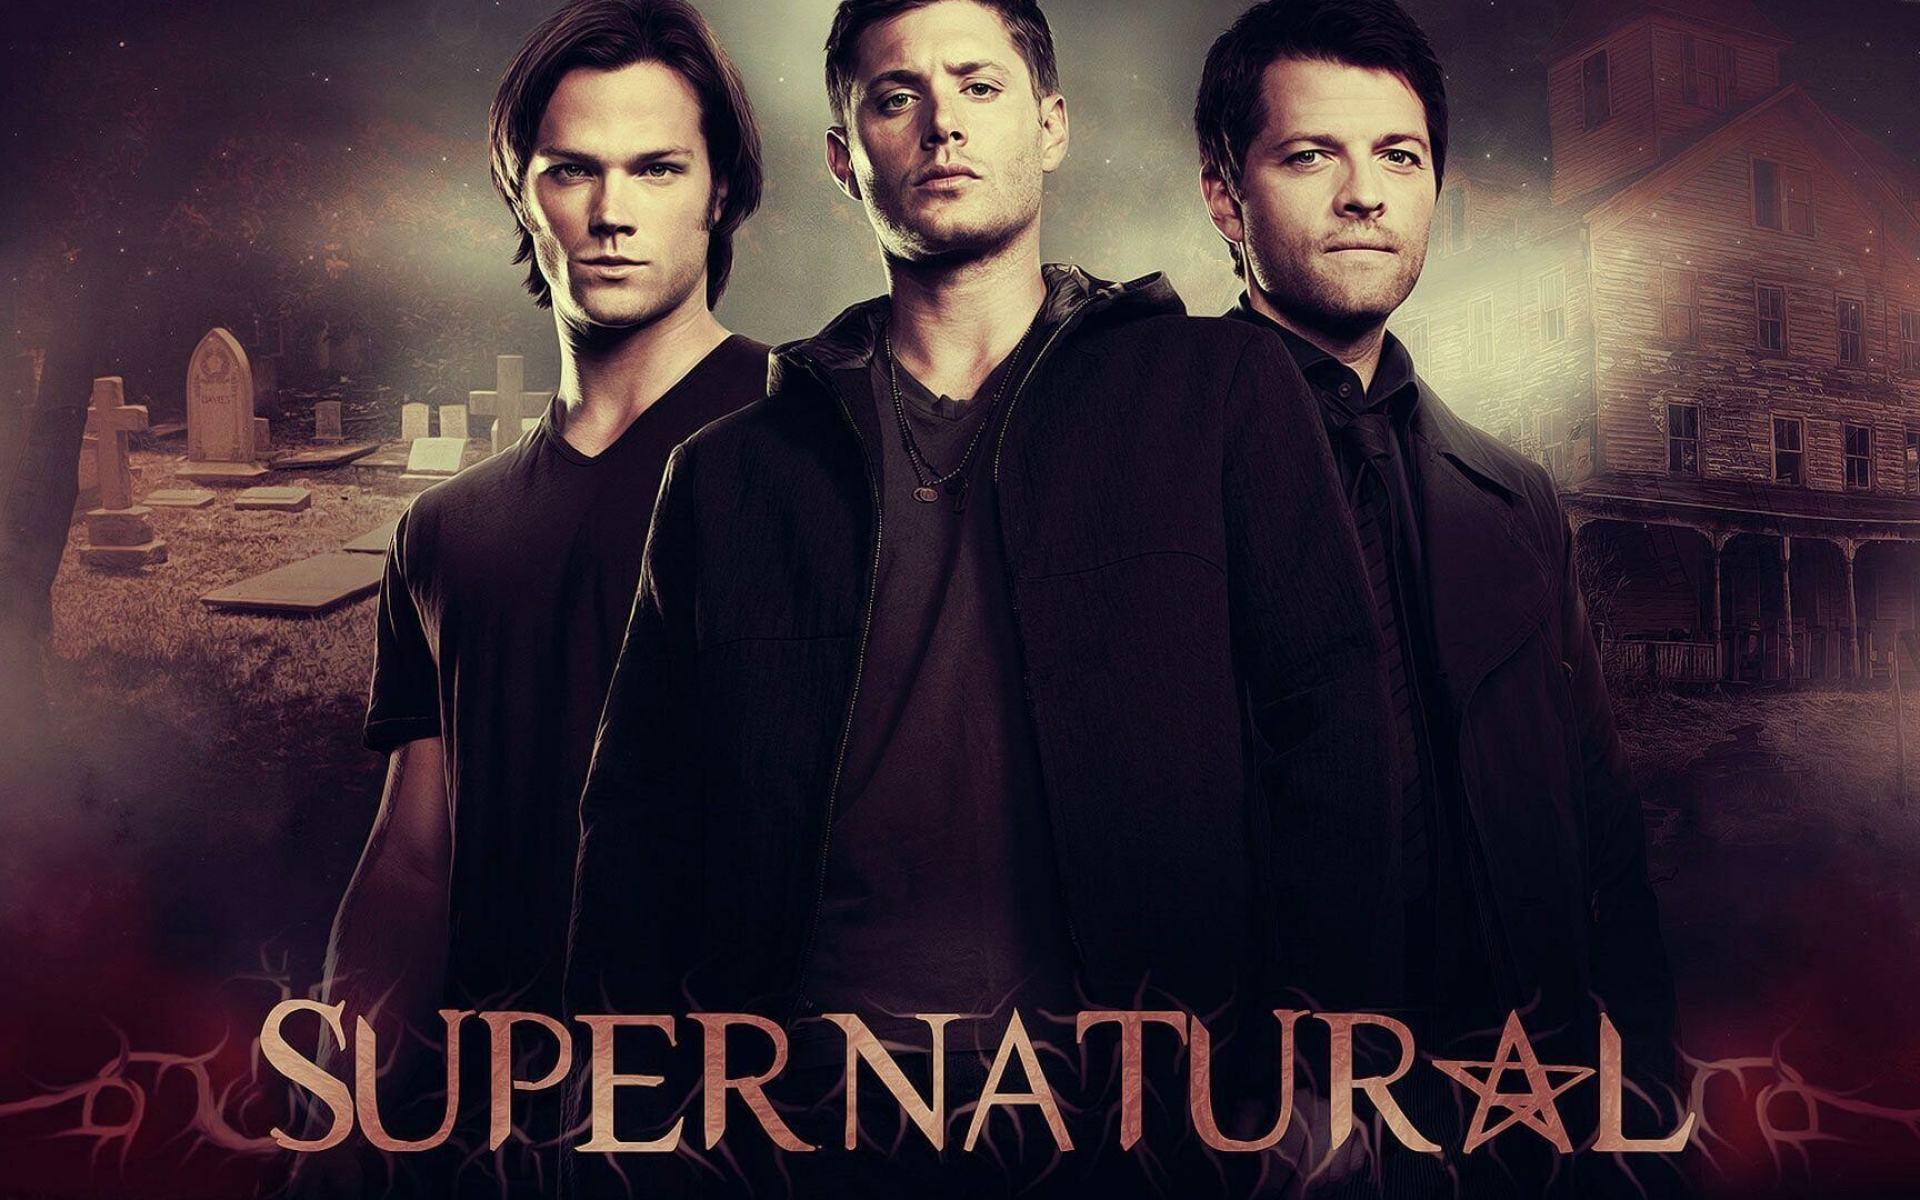 Supernatural: Based on American urban legends and folklore as well as classic supernatural creatures such as vampires, werewolves, and ghosts. 1920x1200 HD Background.